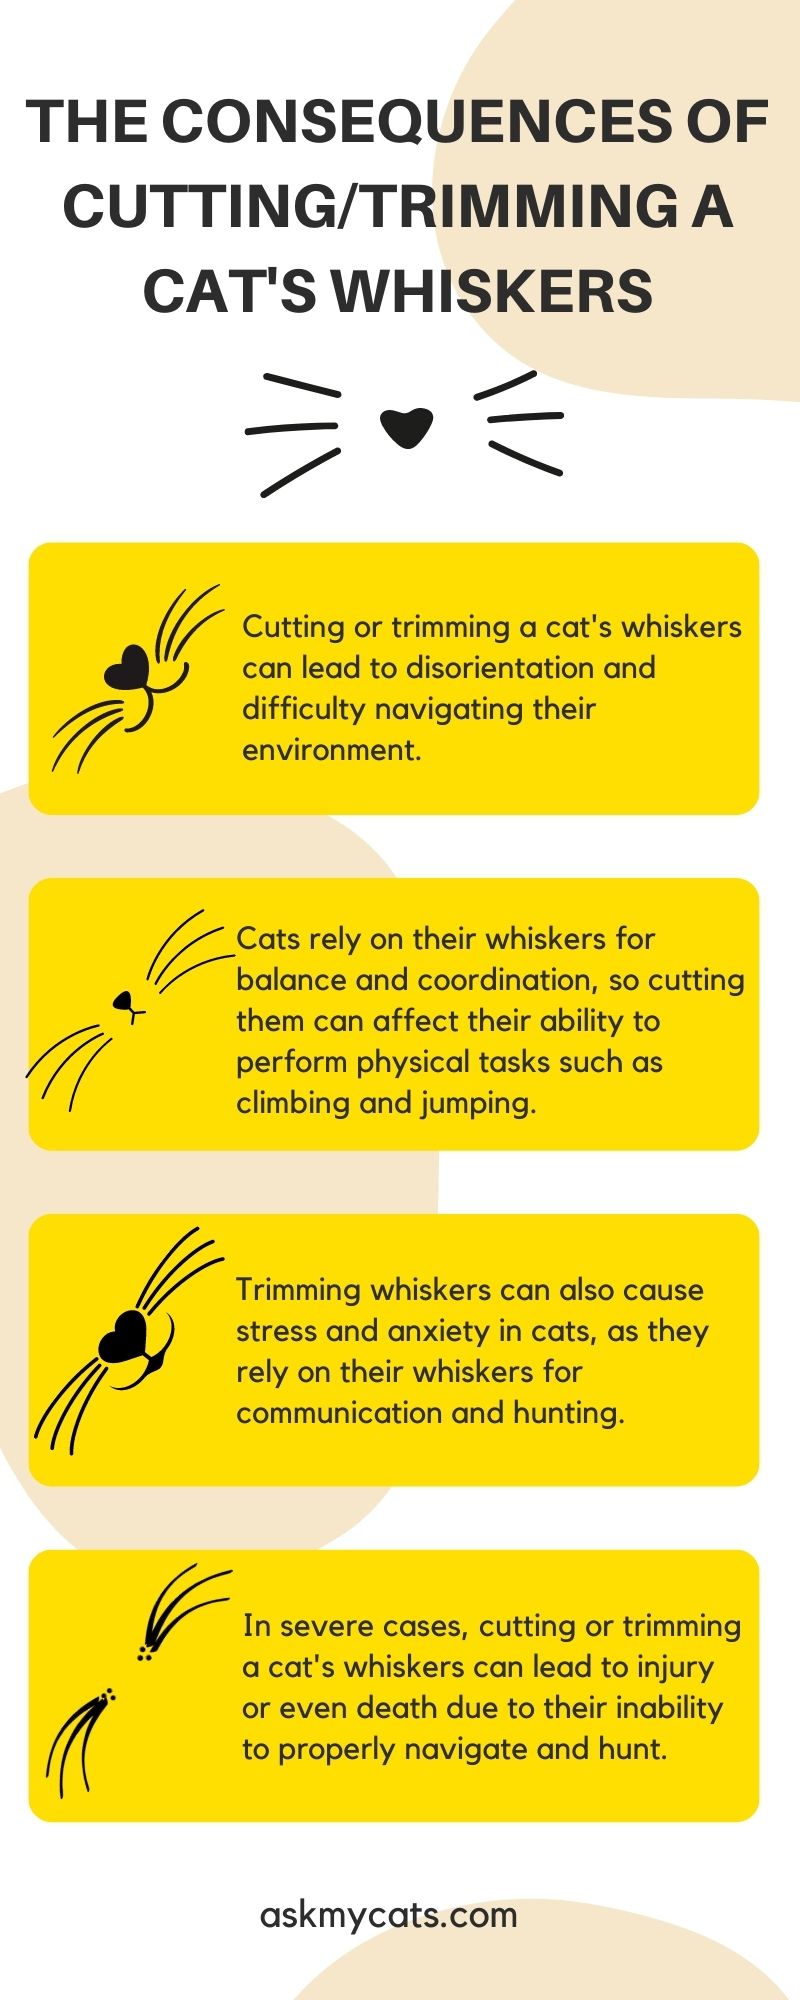 The Consequences of Cutting/Trimming a Cat's Whiskers (Infographic)